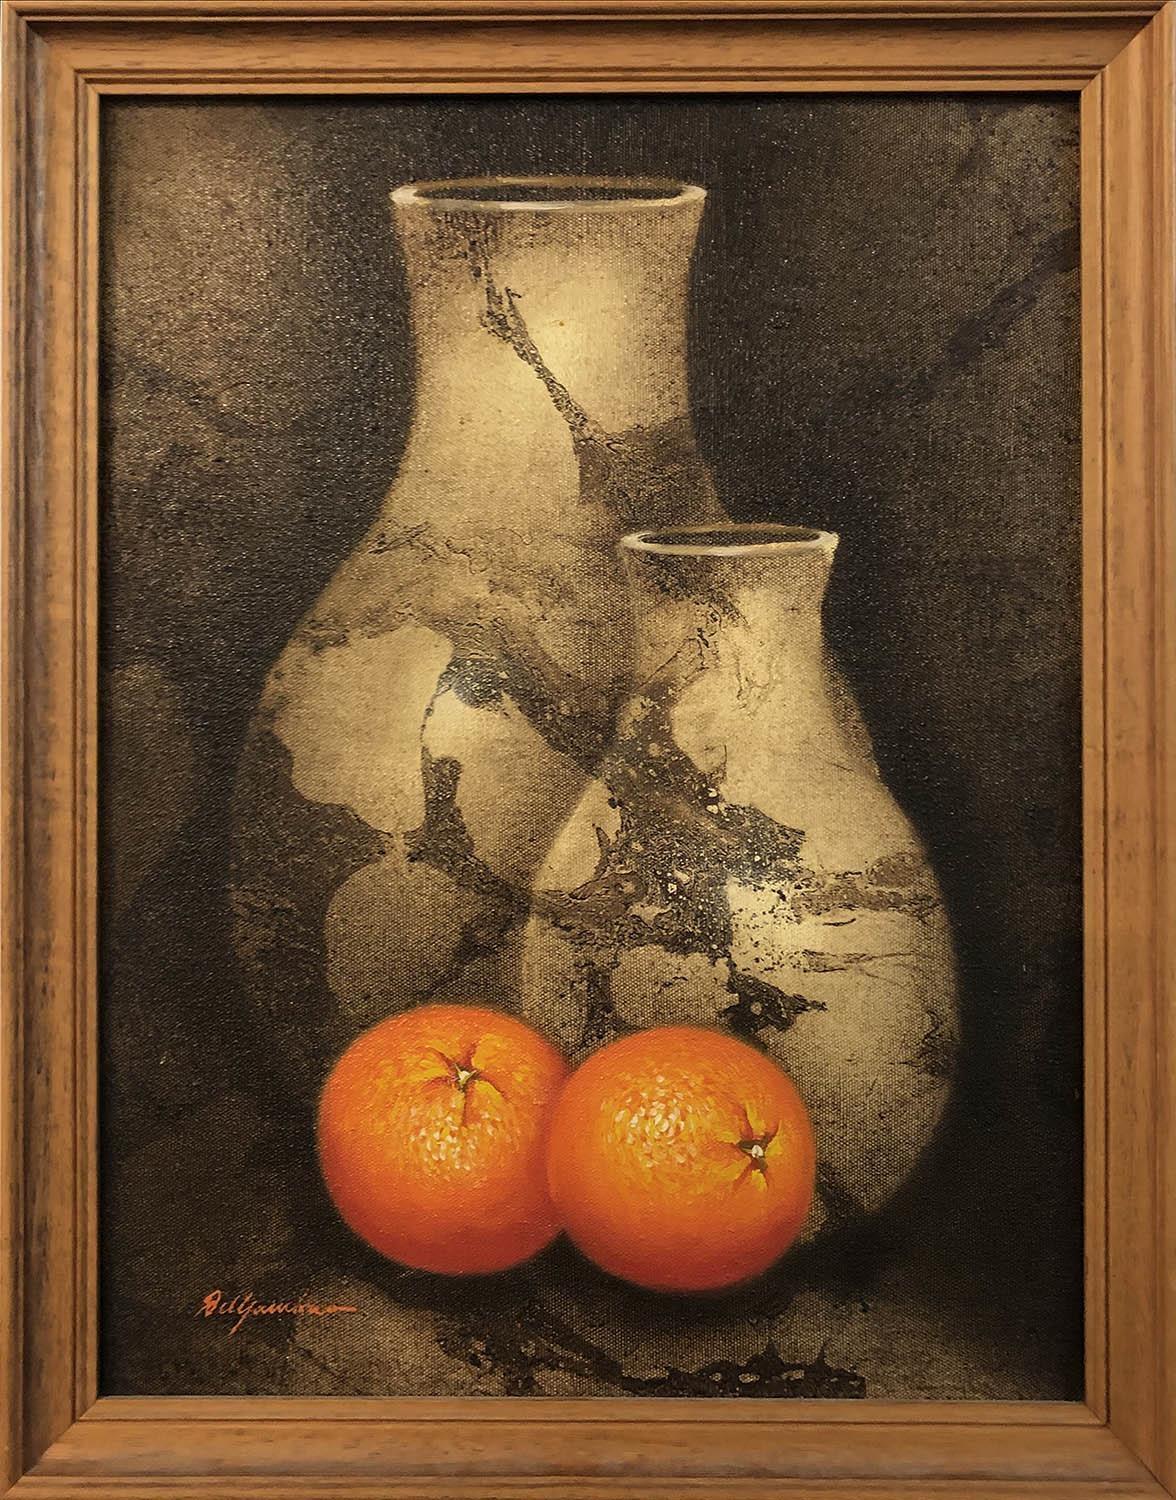 20th CENTURY EASTERN EUROPEAN SCHOOL 'Oranges and Vases', oil on board, signed indistinctly lower